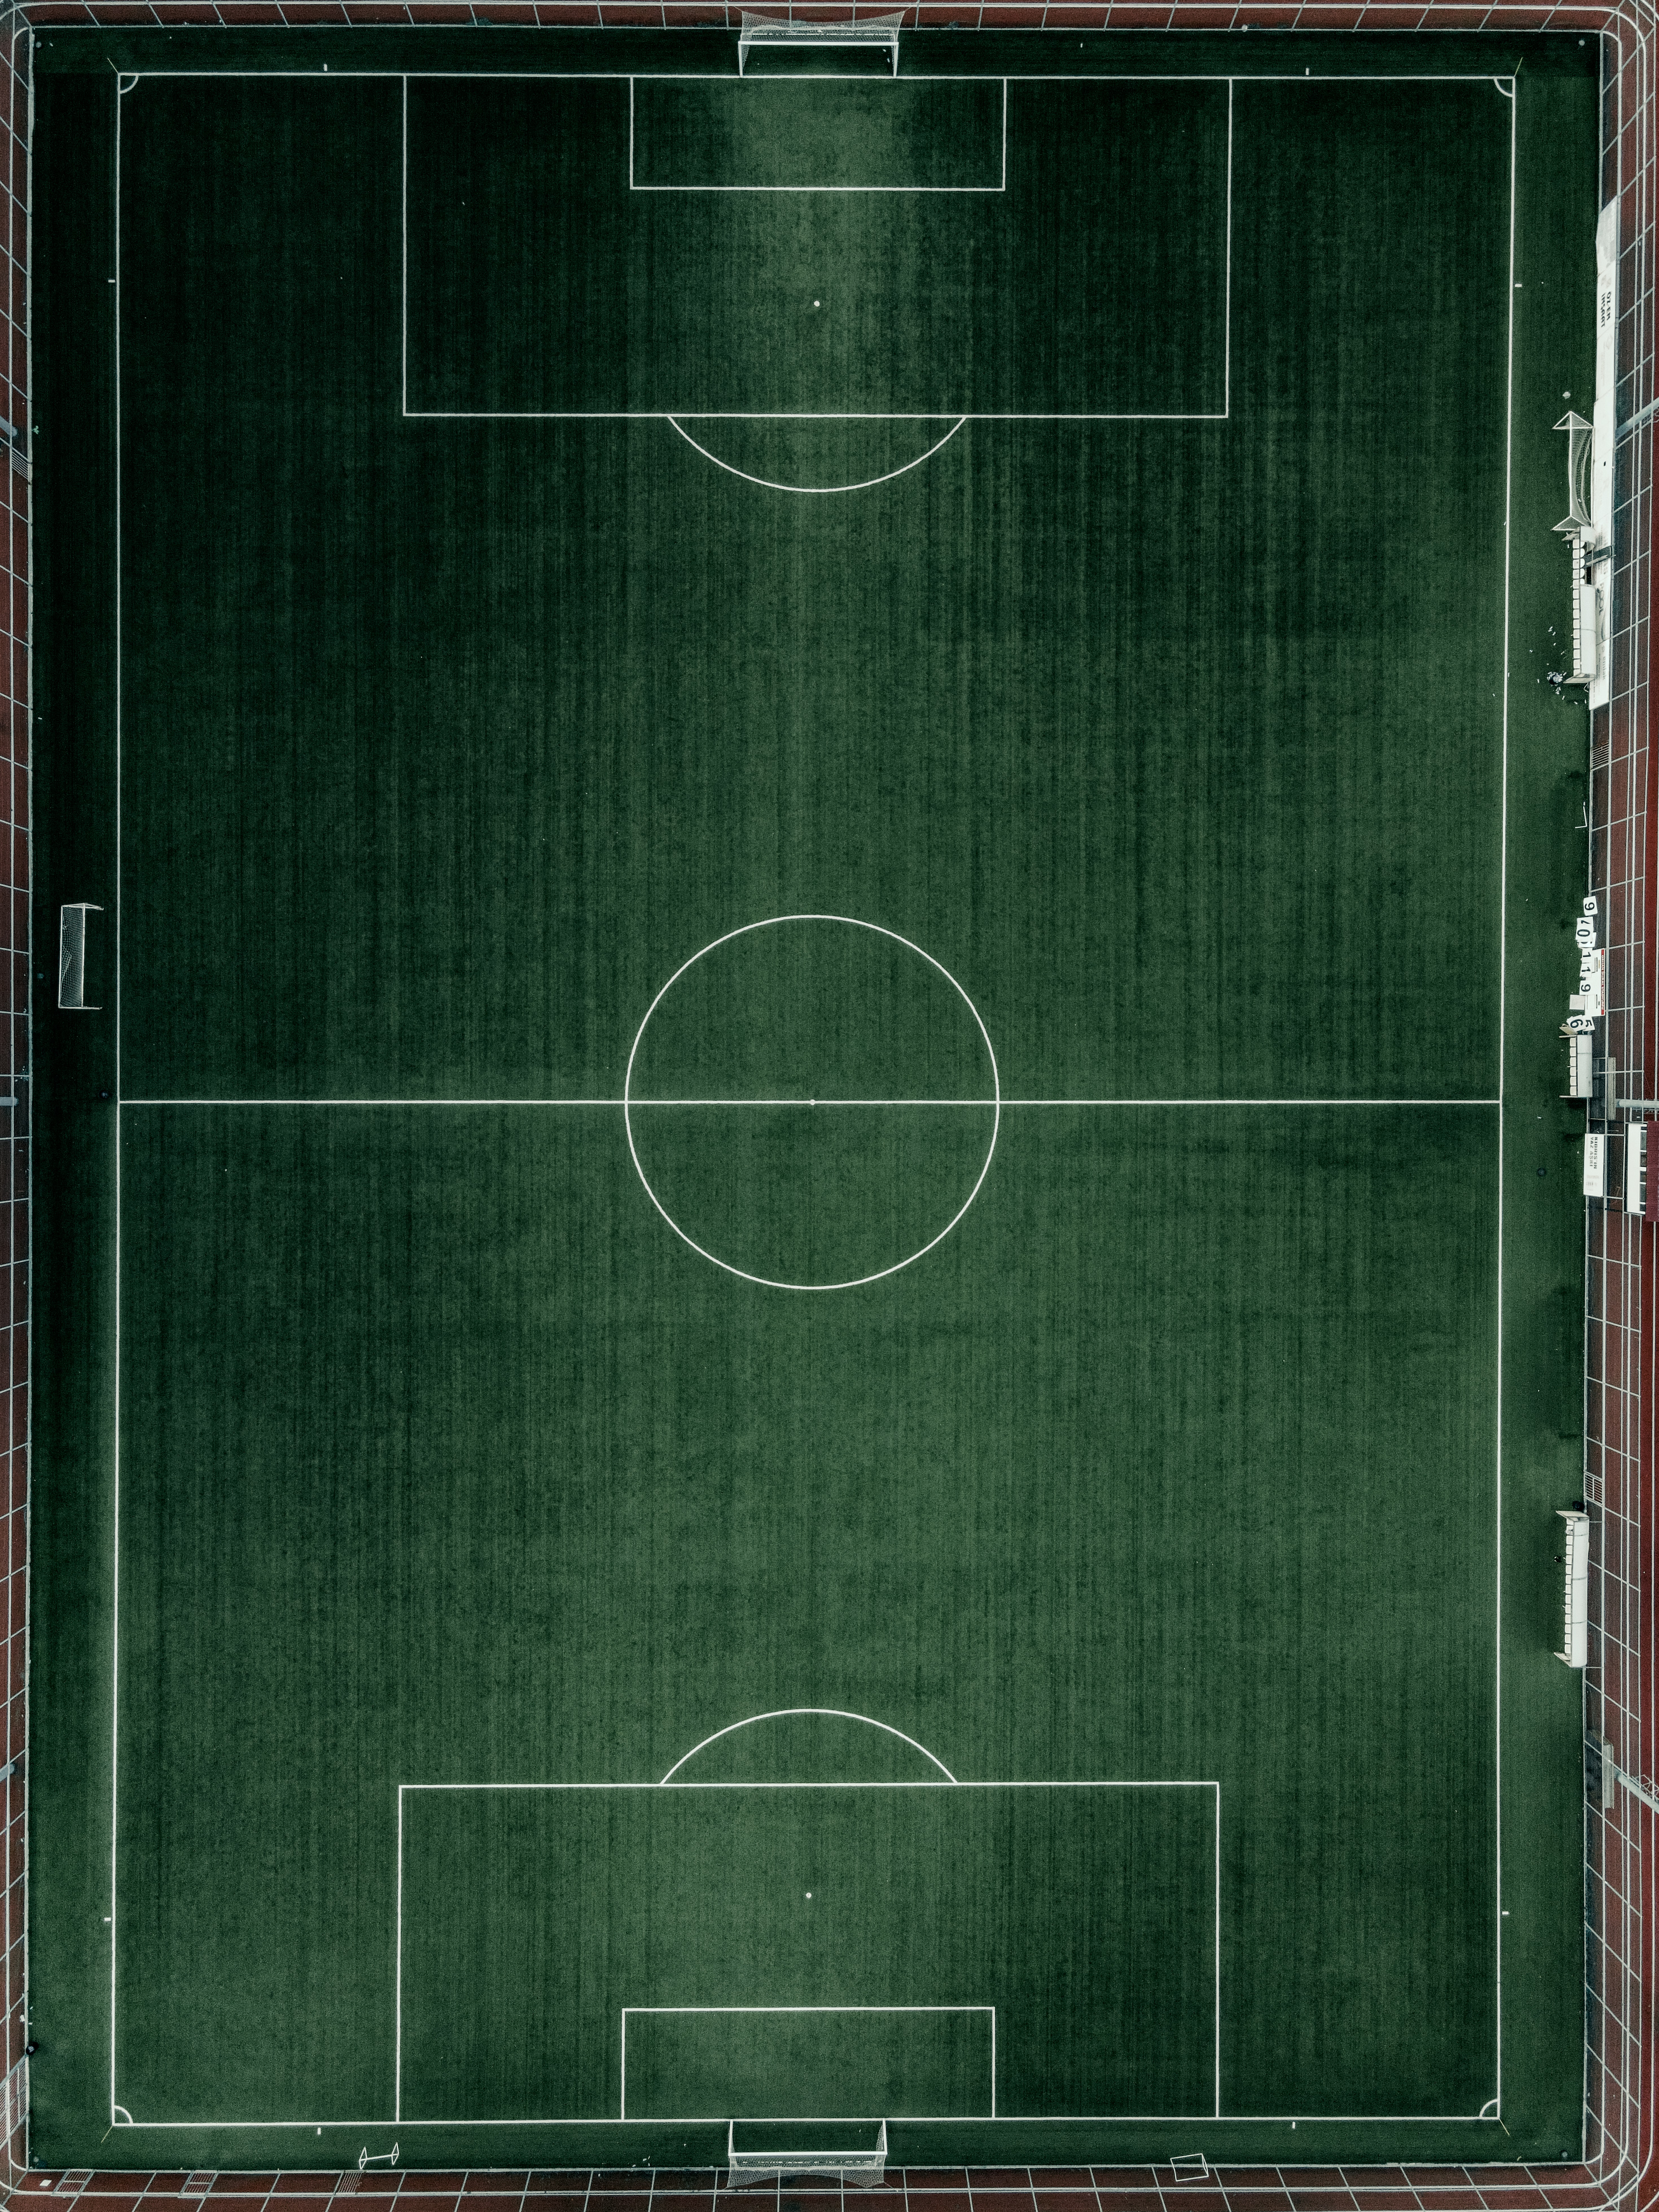 football, football field, sports, green, view from above, lawn